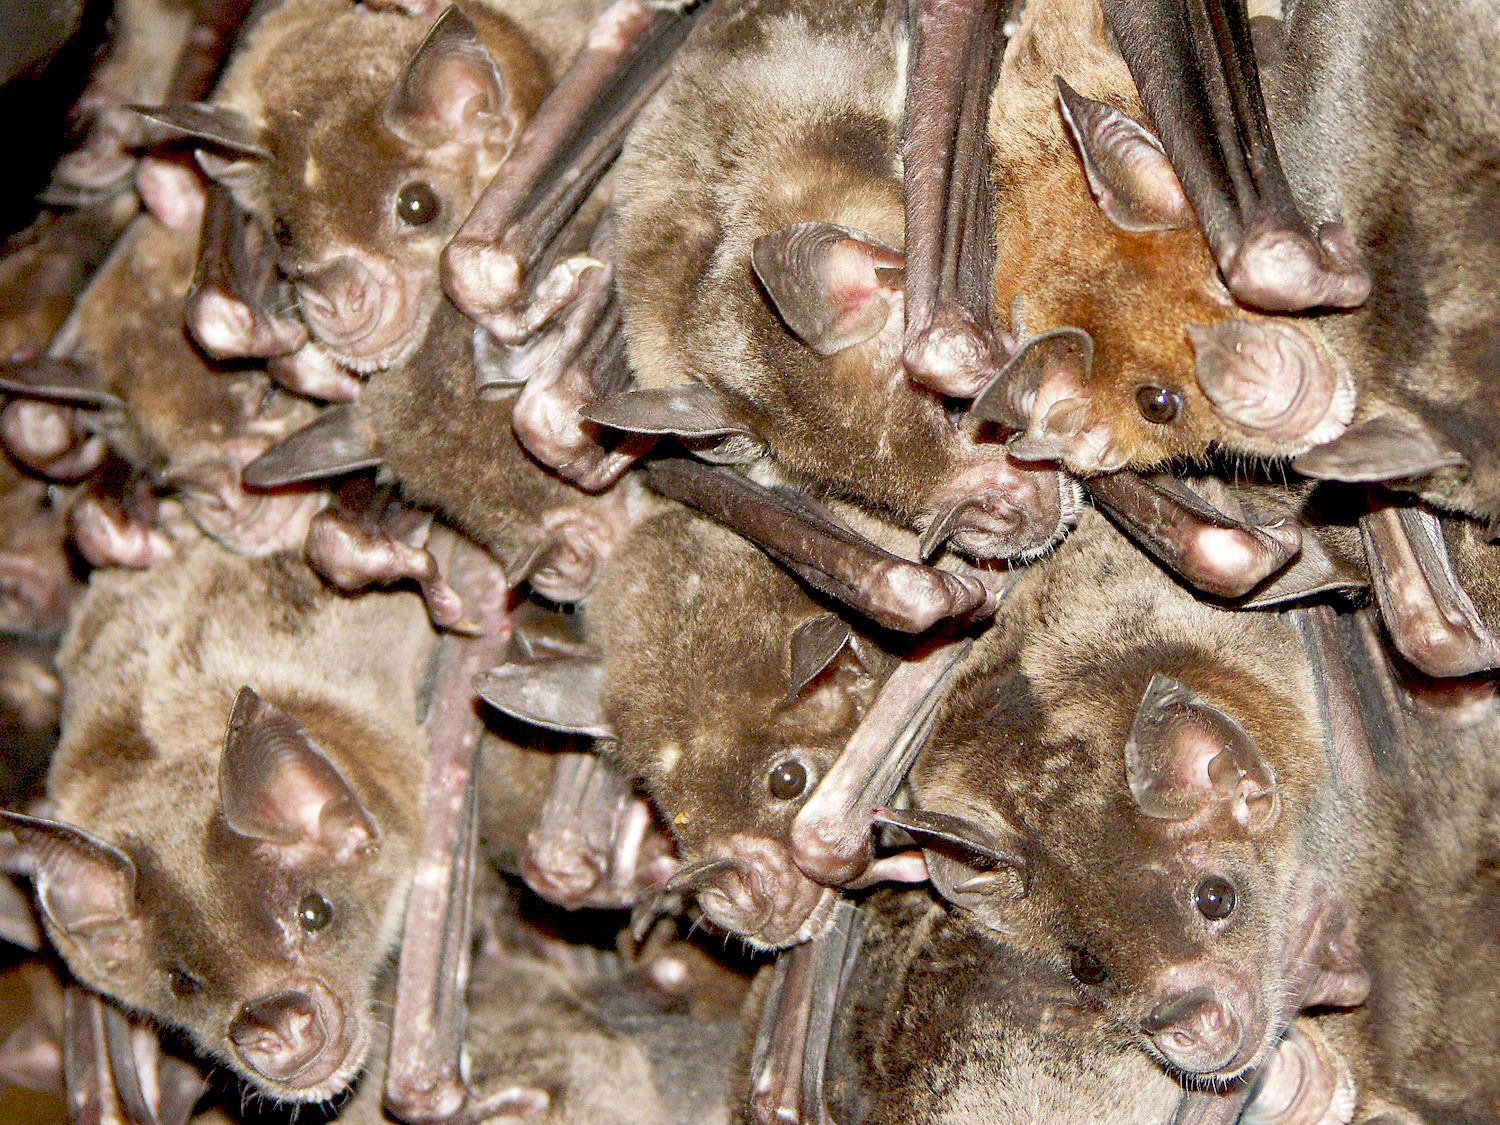 Dr. Uwe Firzlaff and his team investigated spatial orientation among the pale spear-nosed bat.